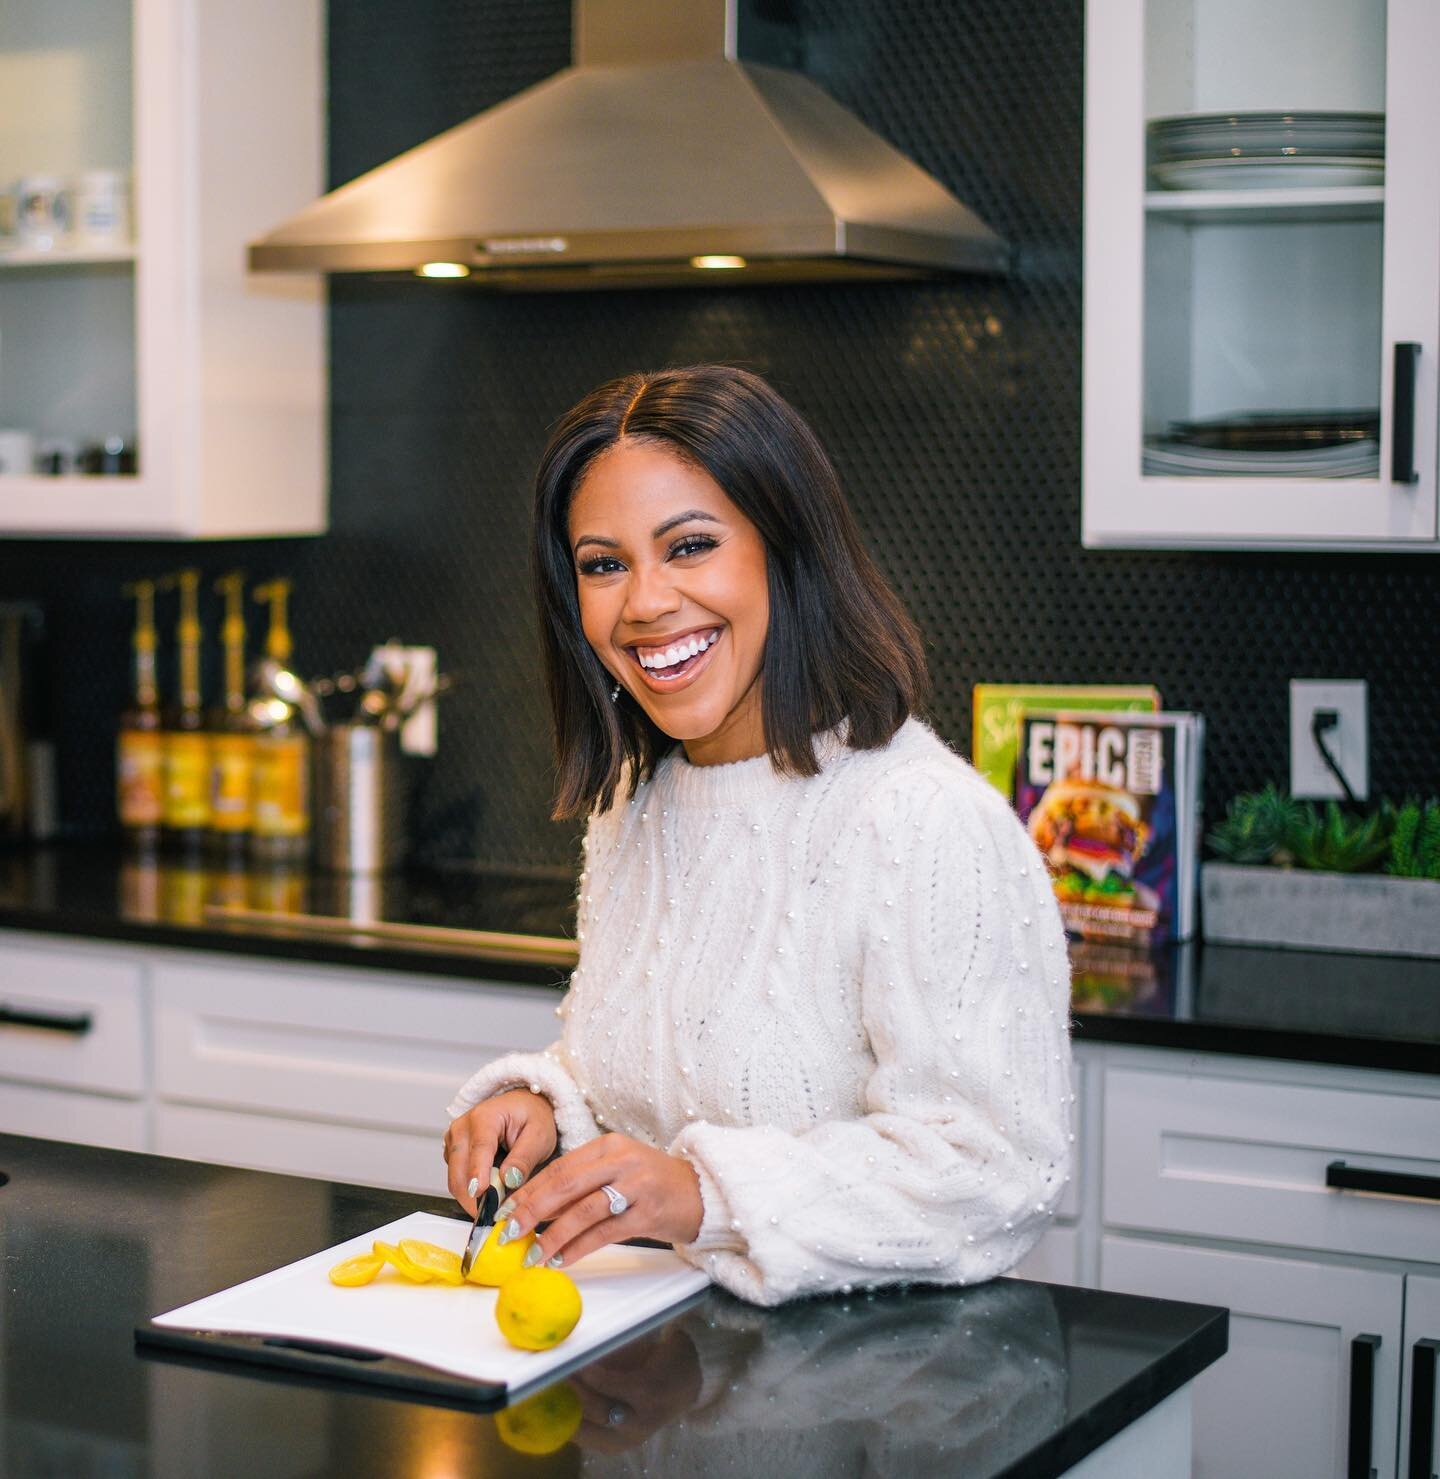 I&rsquo;ve been consuming lots of food content lately on YouTube looking for inspiration and ideas. I mean&hellip;we all have to eat everyday, so why not make what you are eating interesting, exciting and yummy?⁣
⁣
I&rsquo;ve been loving content from